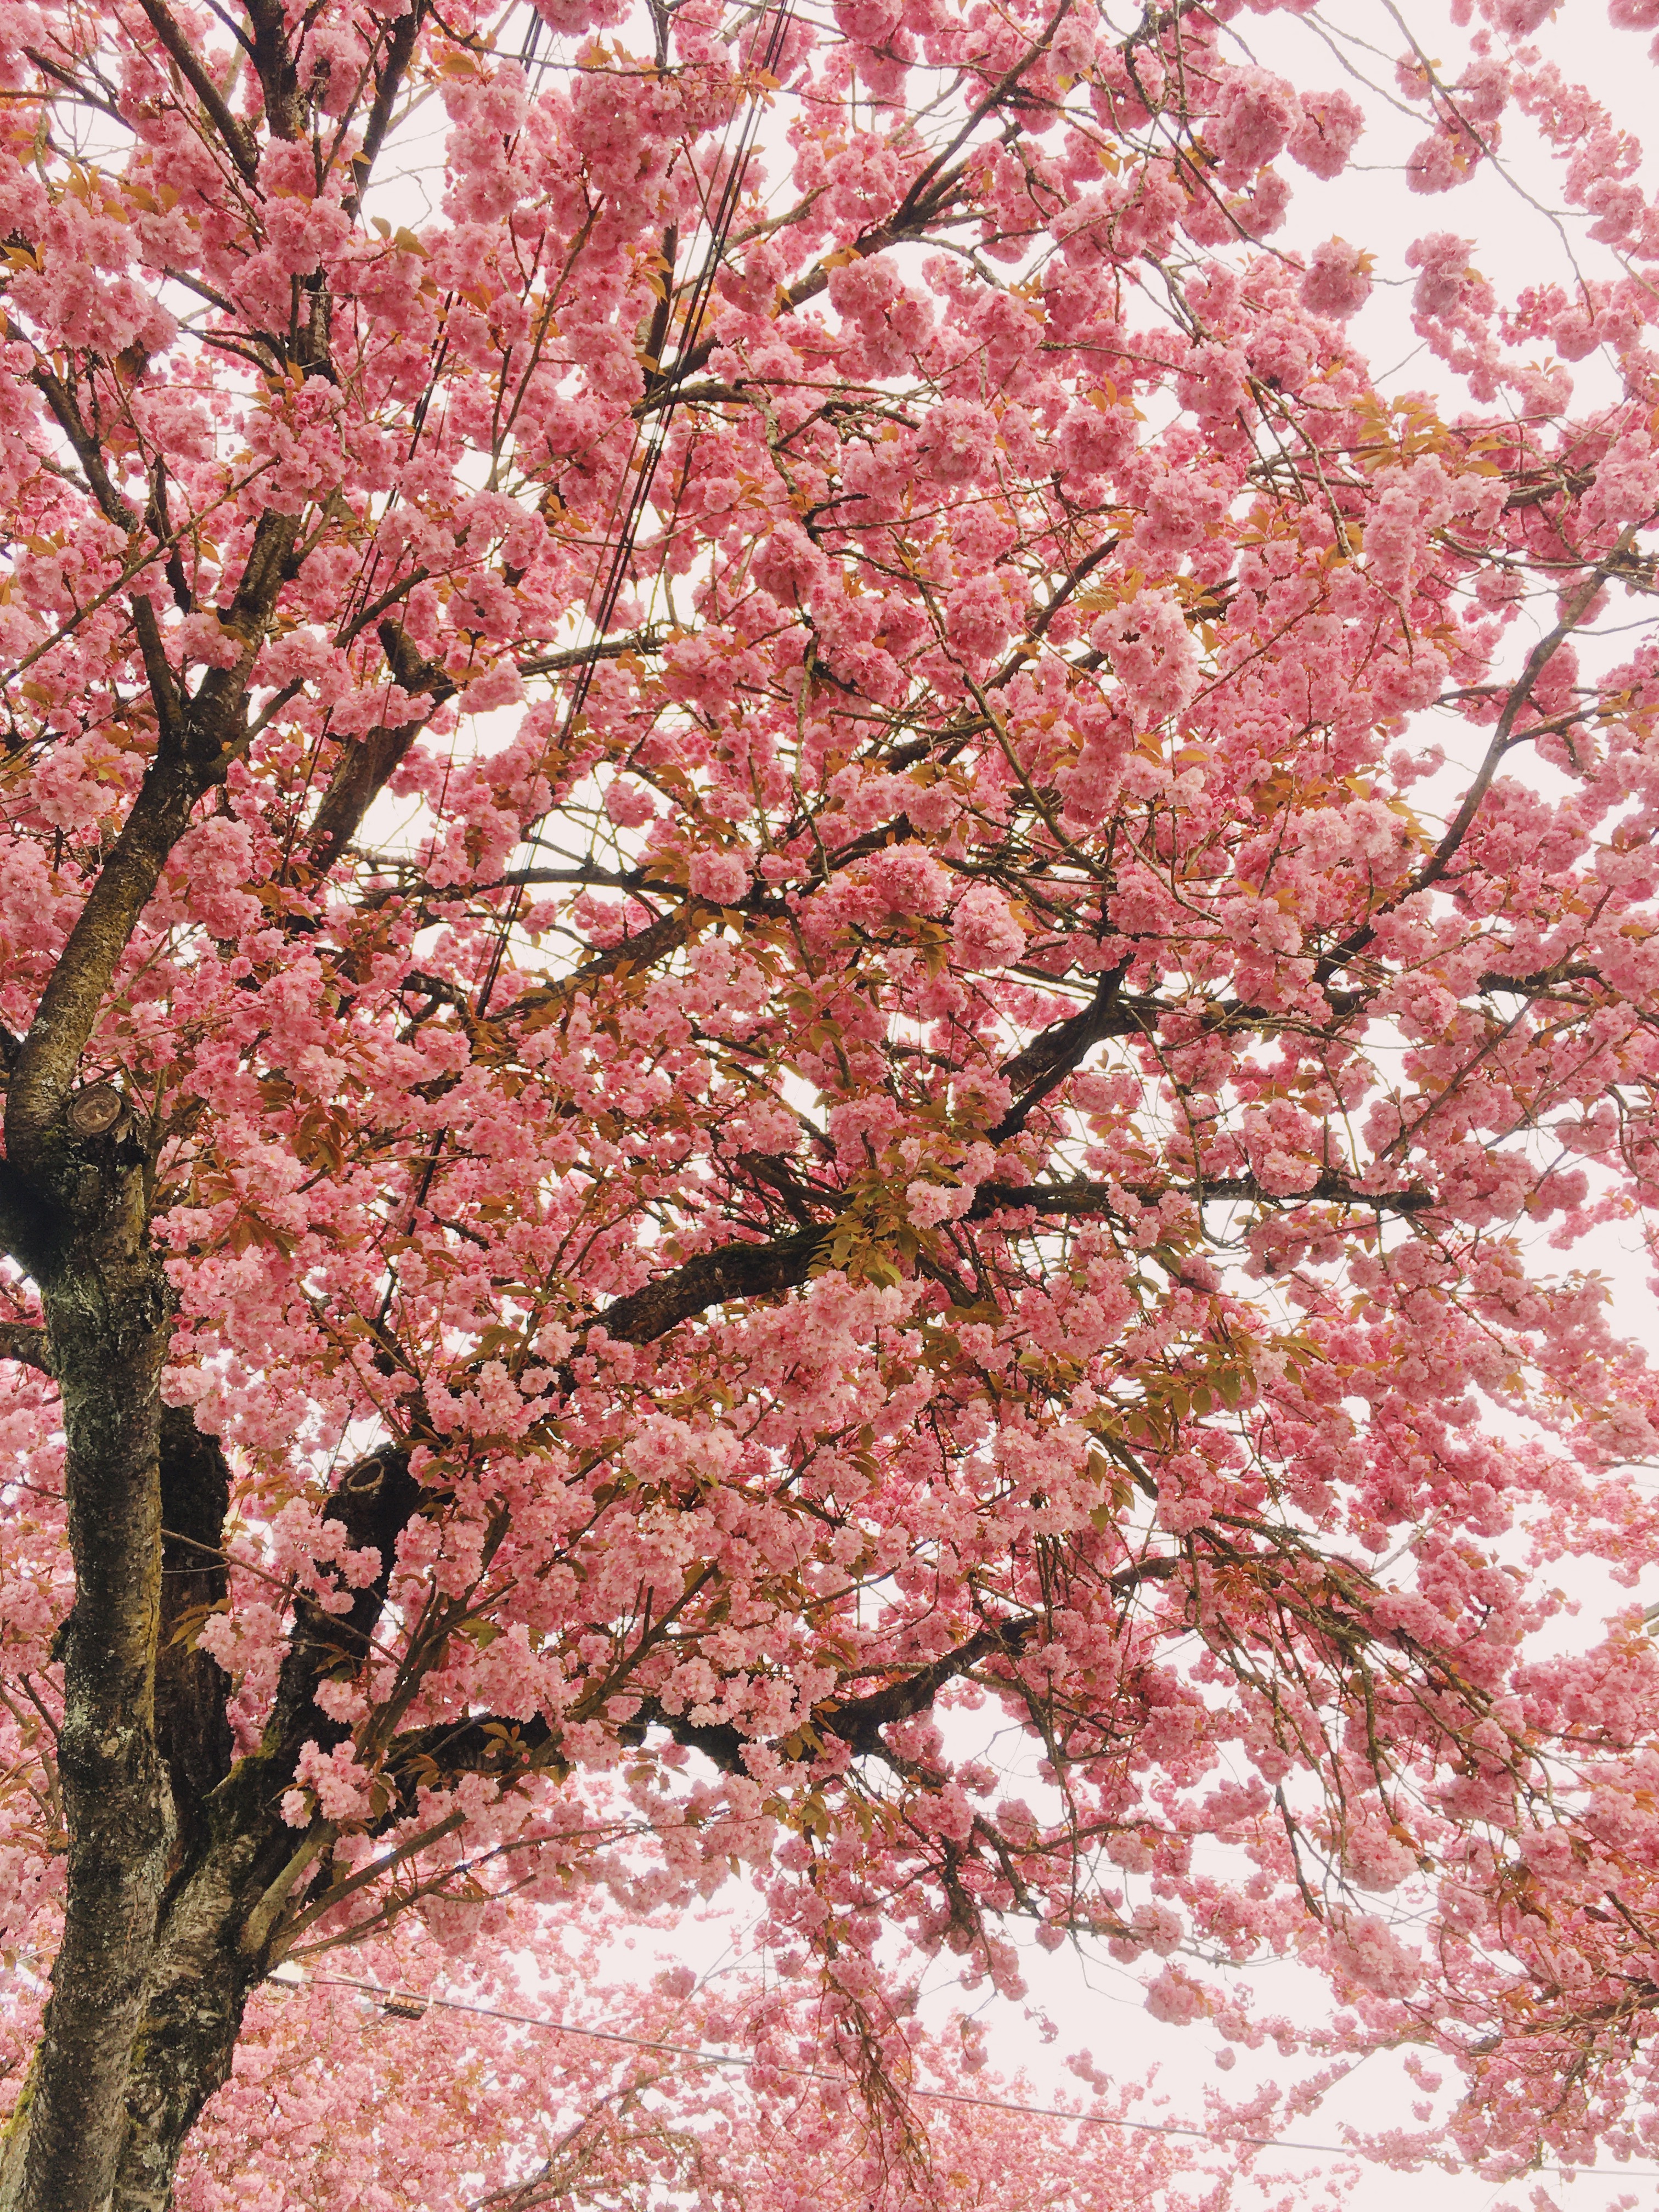 Looking up at vibrant pink cherry blossom trees.